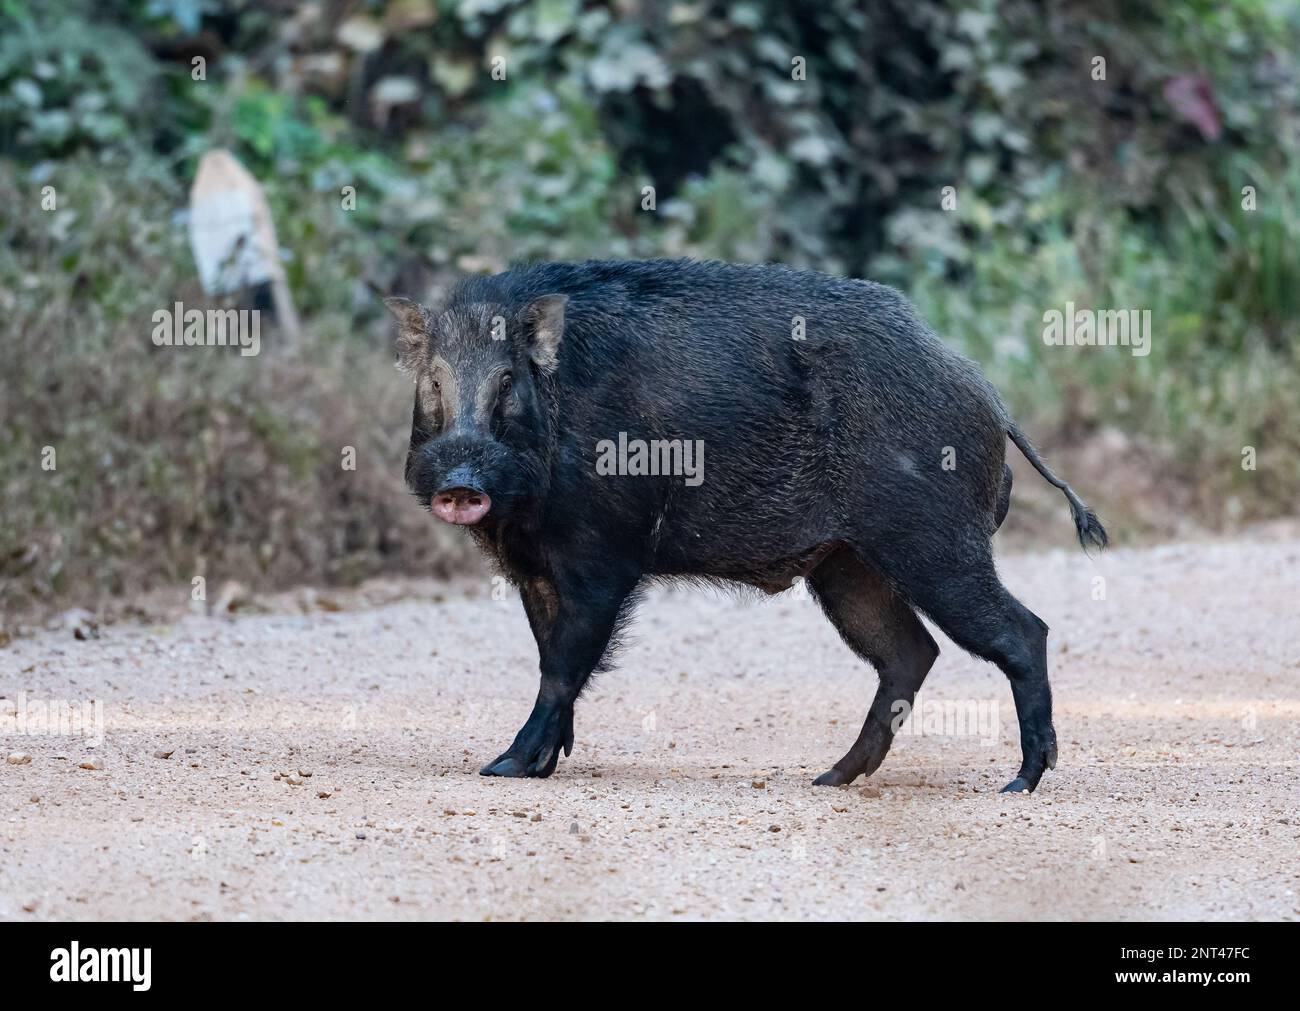 An adult Wild boar (Sus scrofa) standing on a road. Thailand. Stock Photo